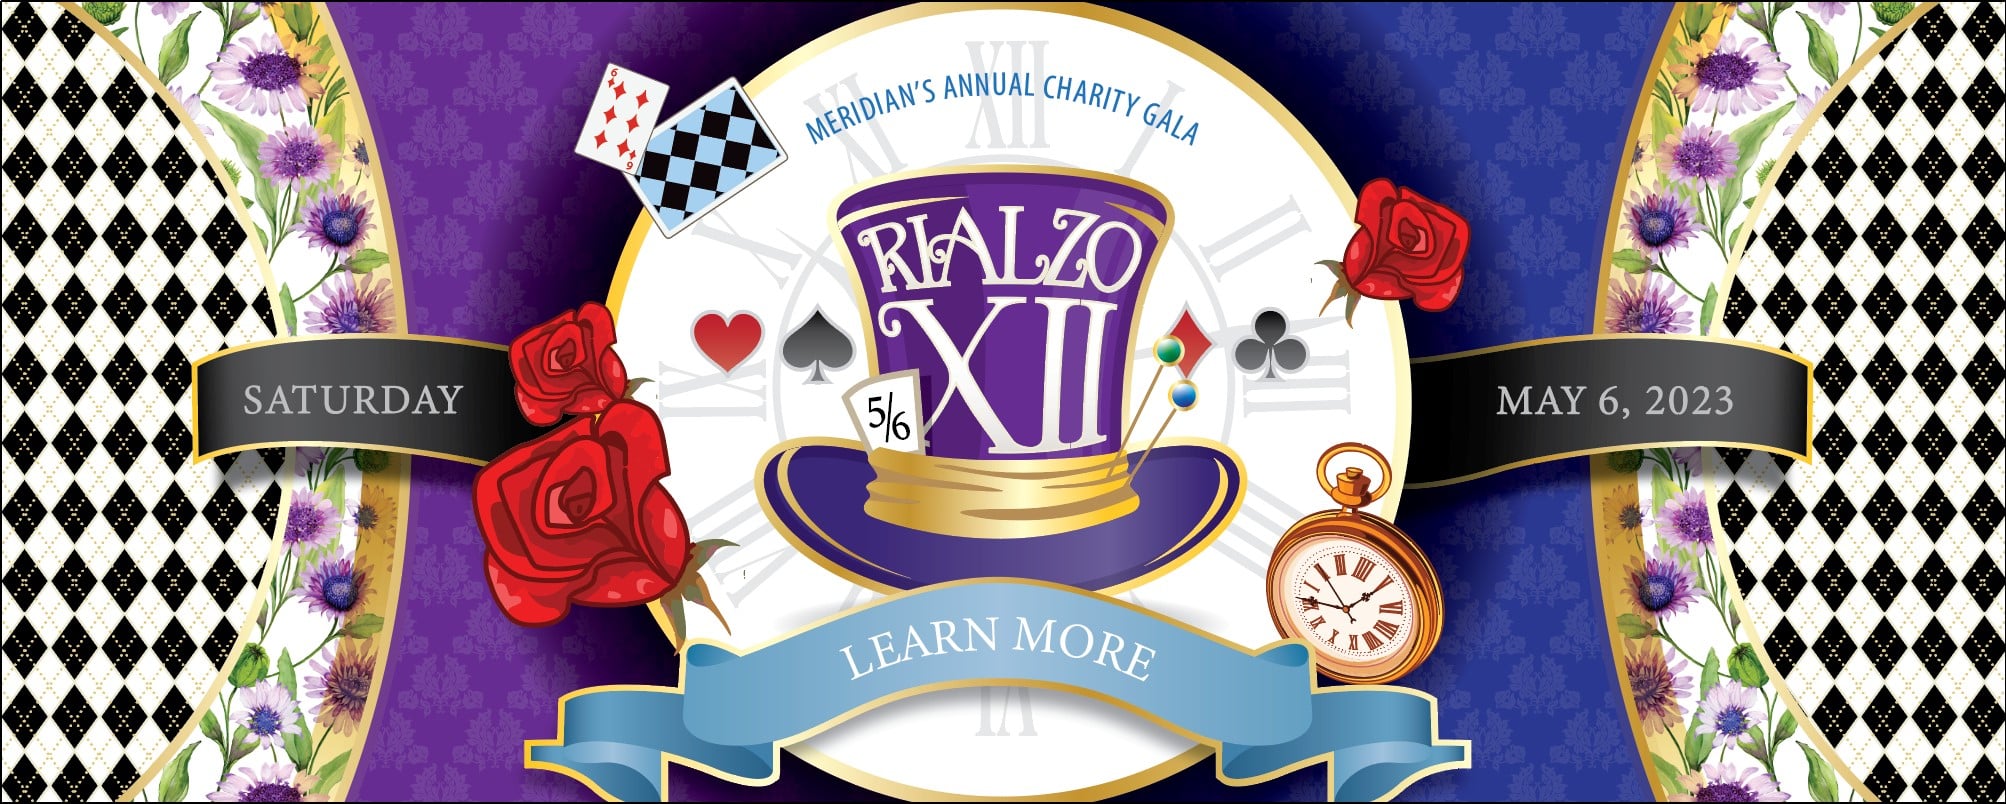 Link to Rialzo XII Website